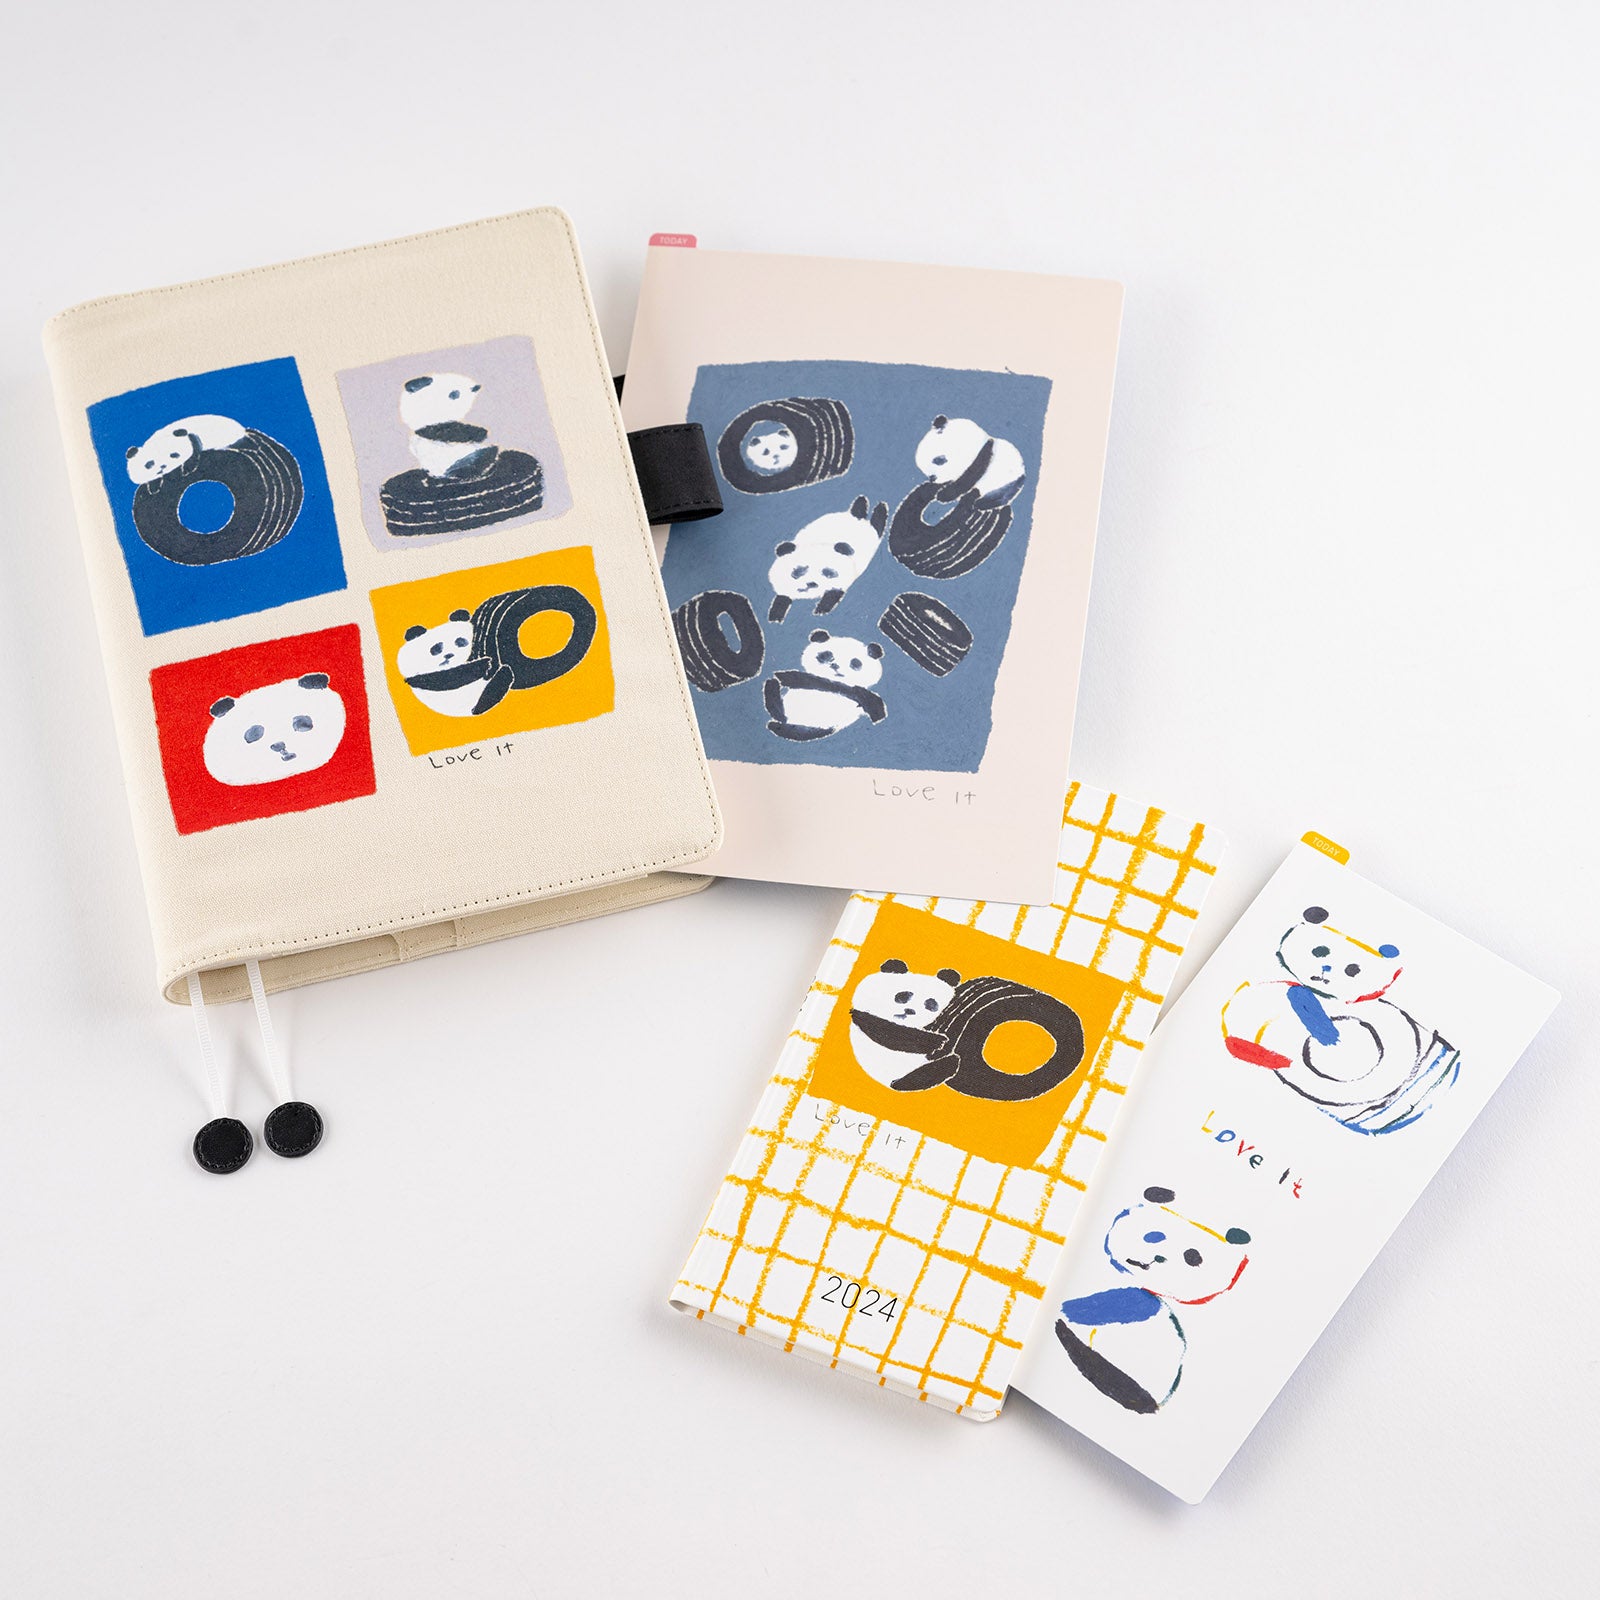 Hobonichi Jin Kitamura: Hobonichi Pencil Board for A6 Size (Love it (Panda)) This pencil board features pandas drawn by illustrator and children’s book author Jin Kitamura.  The Hobonichi pencil boards are designed to use underneath the page you are writing on to keep your writing experience even smoother.